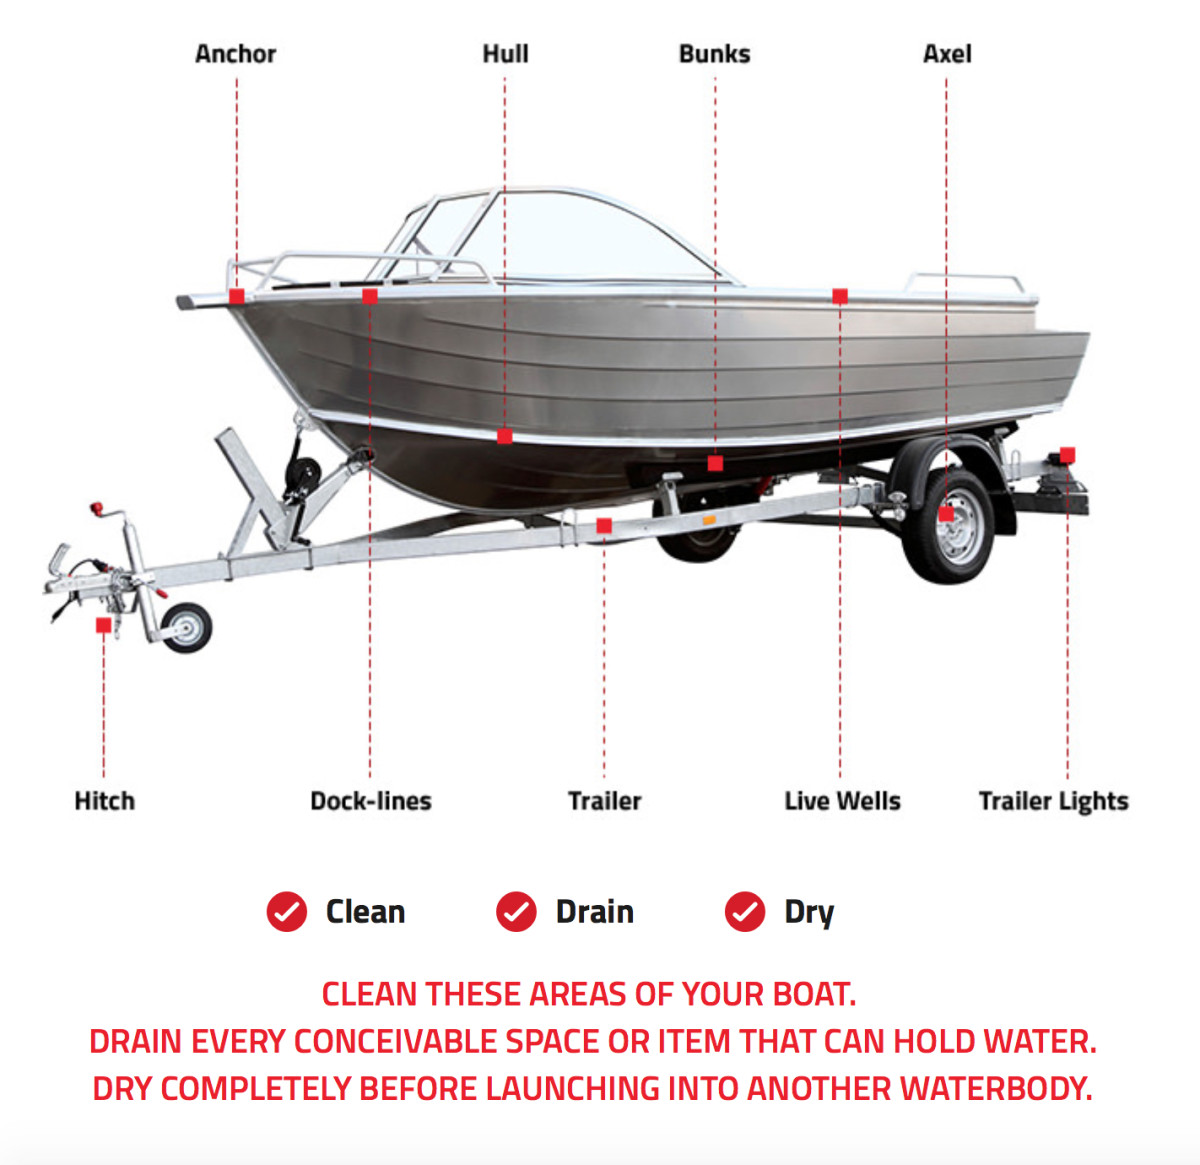 Stop Aquatic Hitchhikers offers tips for boaters to prevent the spread of invasive species